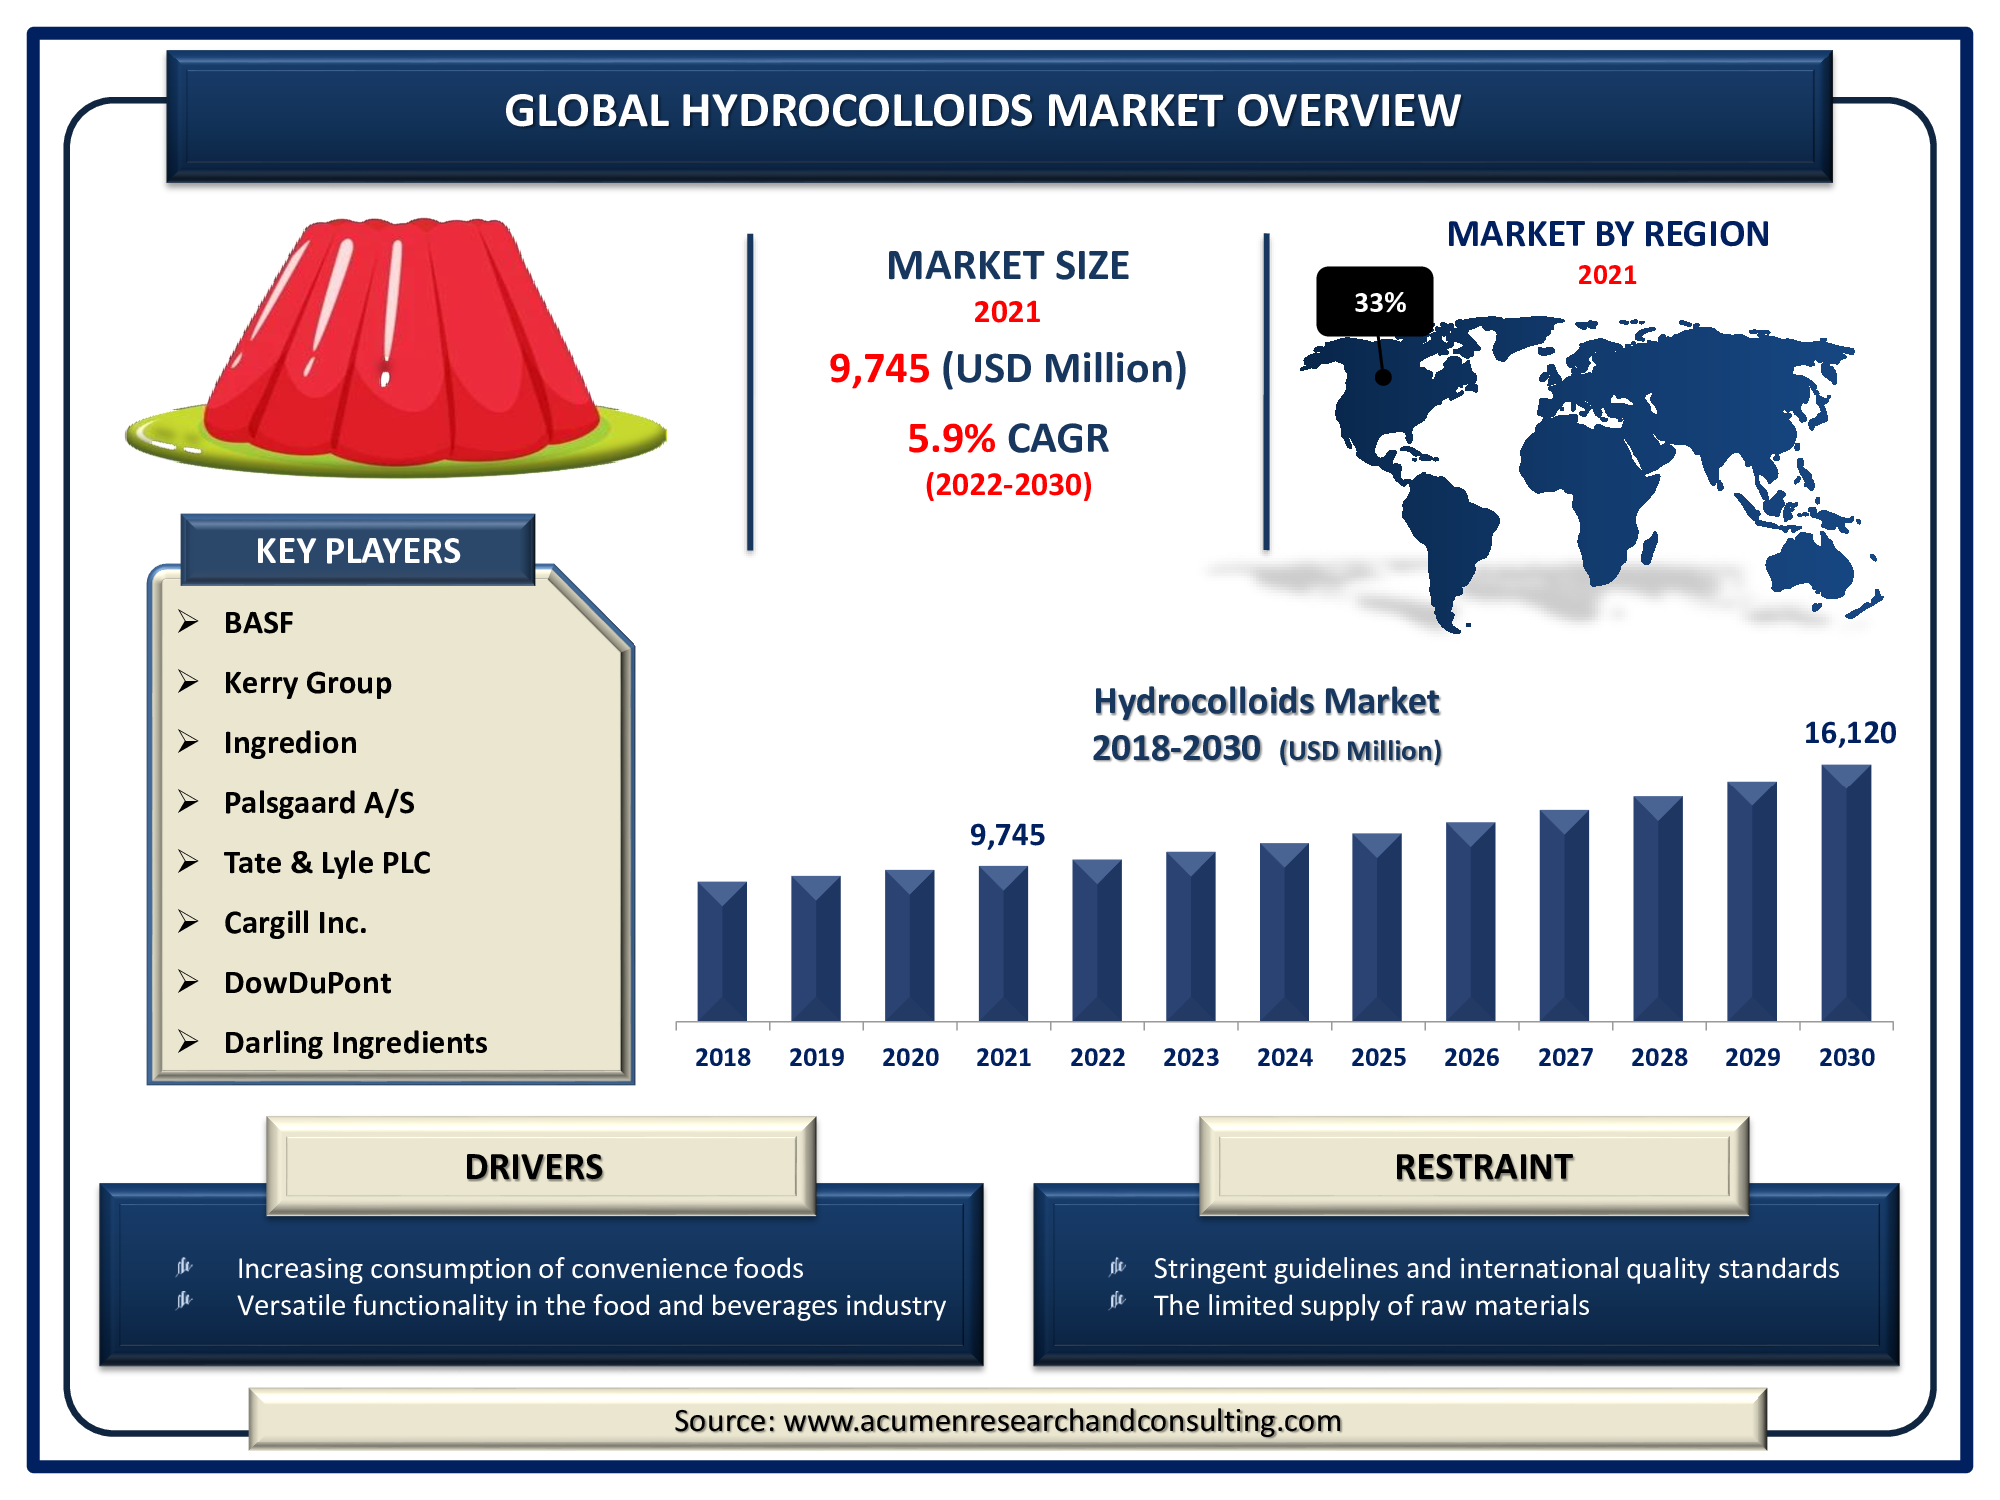 Hydrocolloids Market Size accounted for USD 9,745 Million in 2021 and is expected to reach the market value of USD 16,120 Million by 2030 growing at a CAGR of 5.9% during the forecast period from 2022 to 2030.